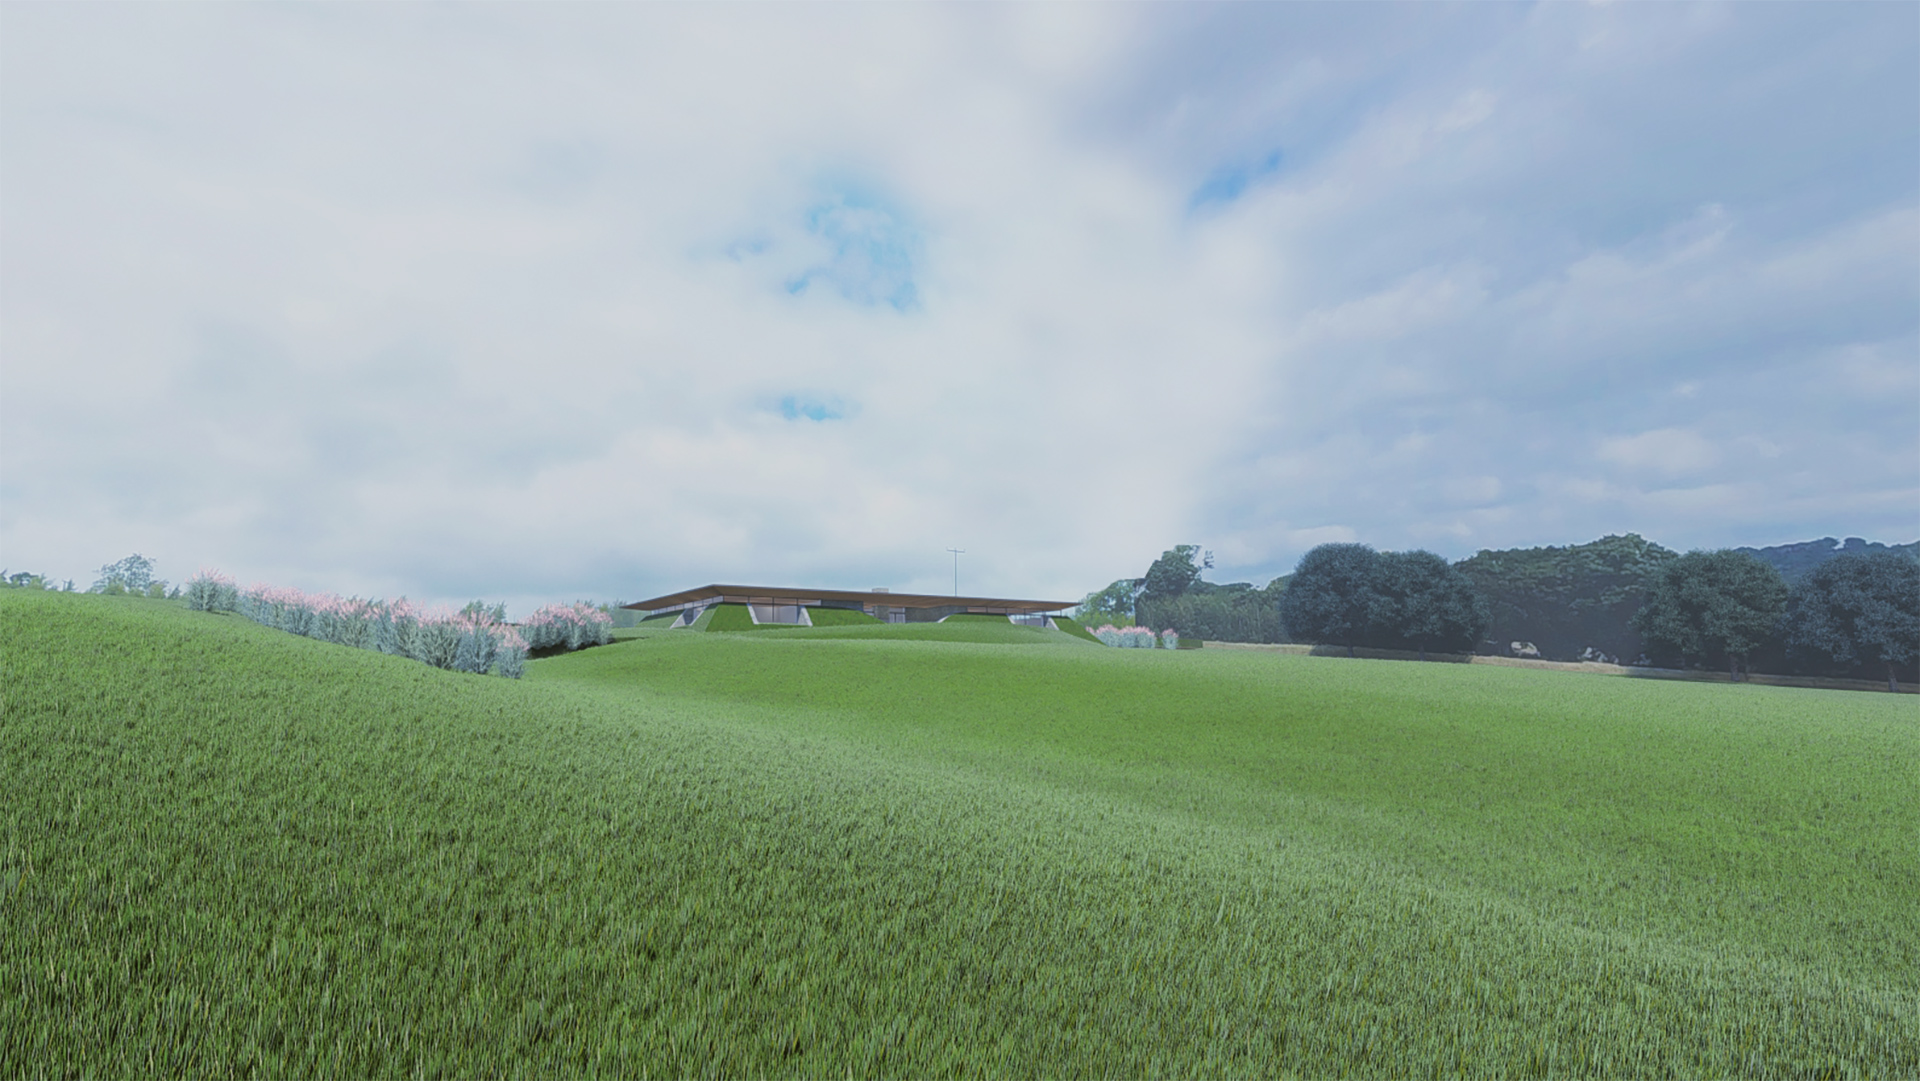 concept for a new contemporary crematorium in Wales south west view